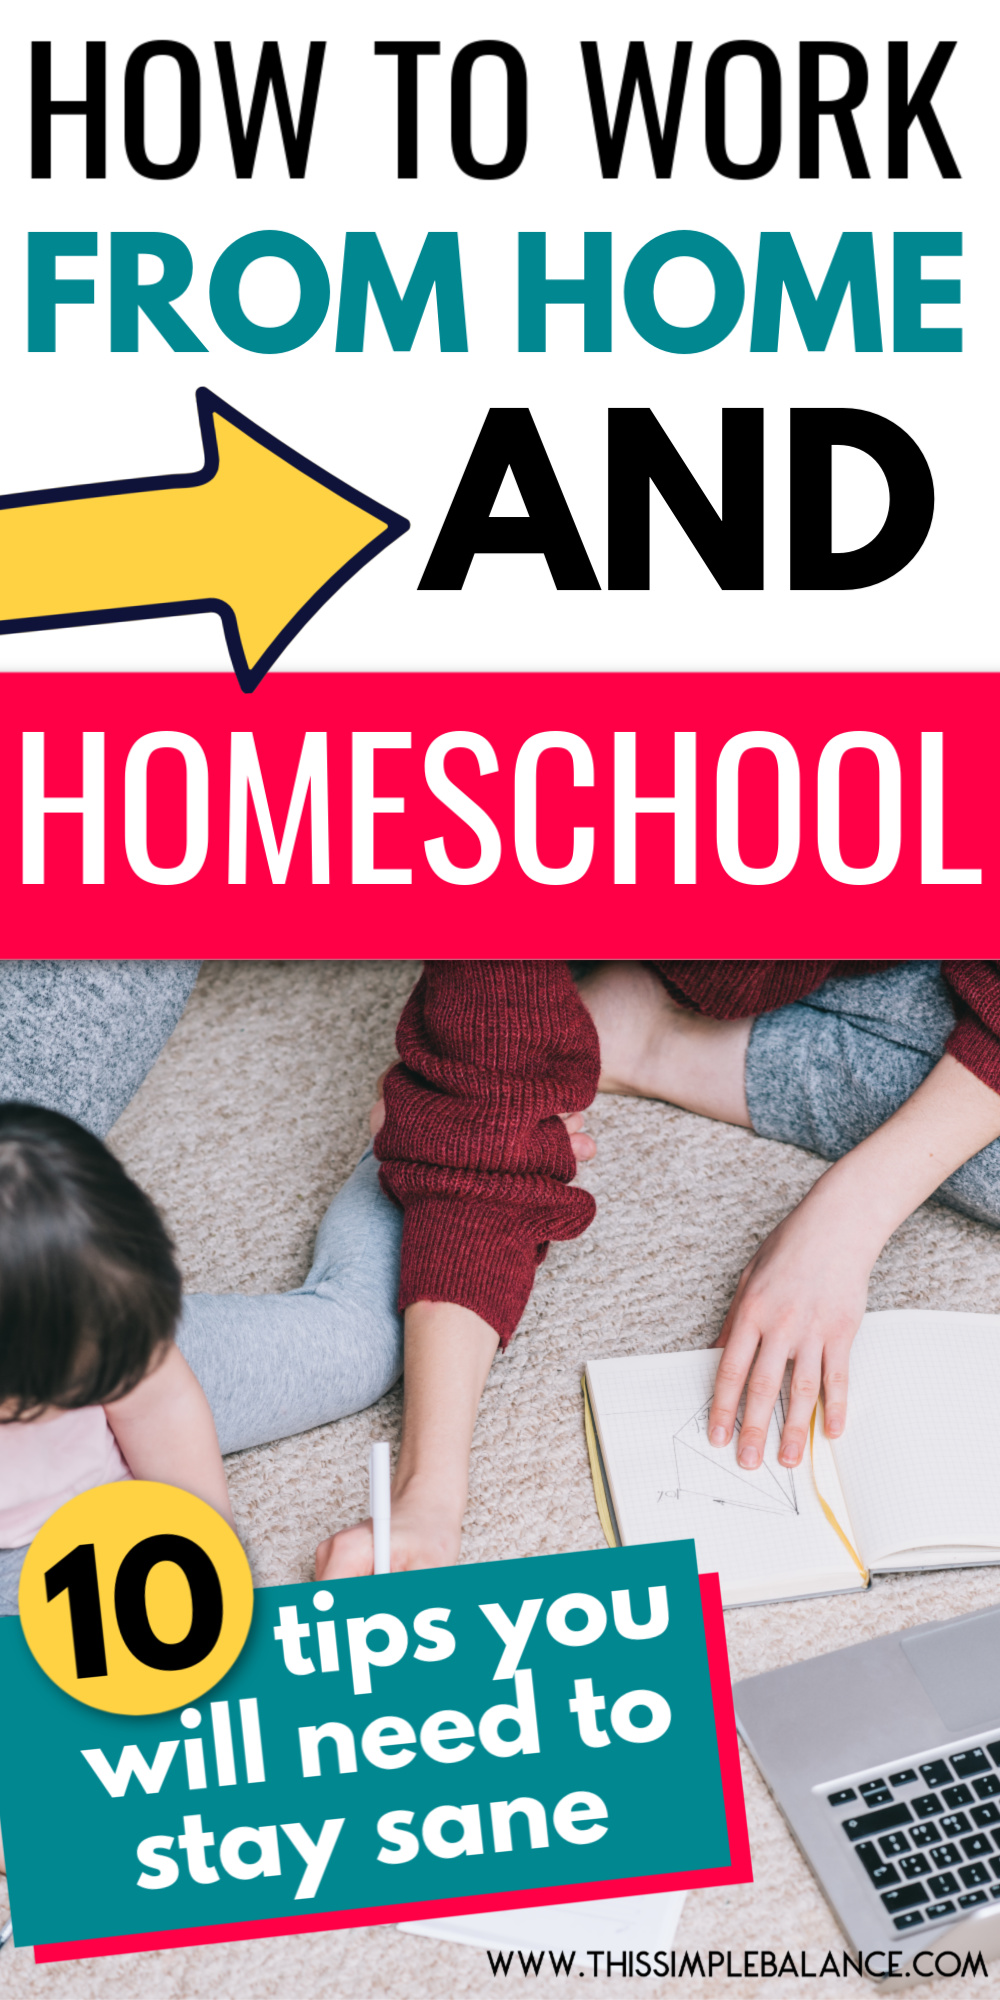 mom helping homeschool child with work on floor, with text overlay, "how to work from home and homeschool - 10 tips you will need to stay sane"